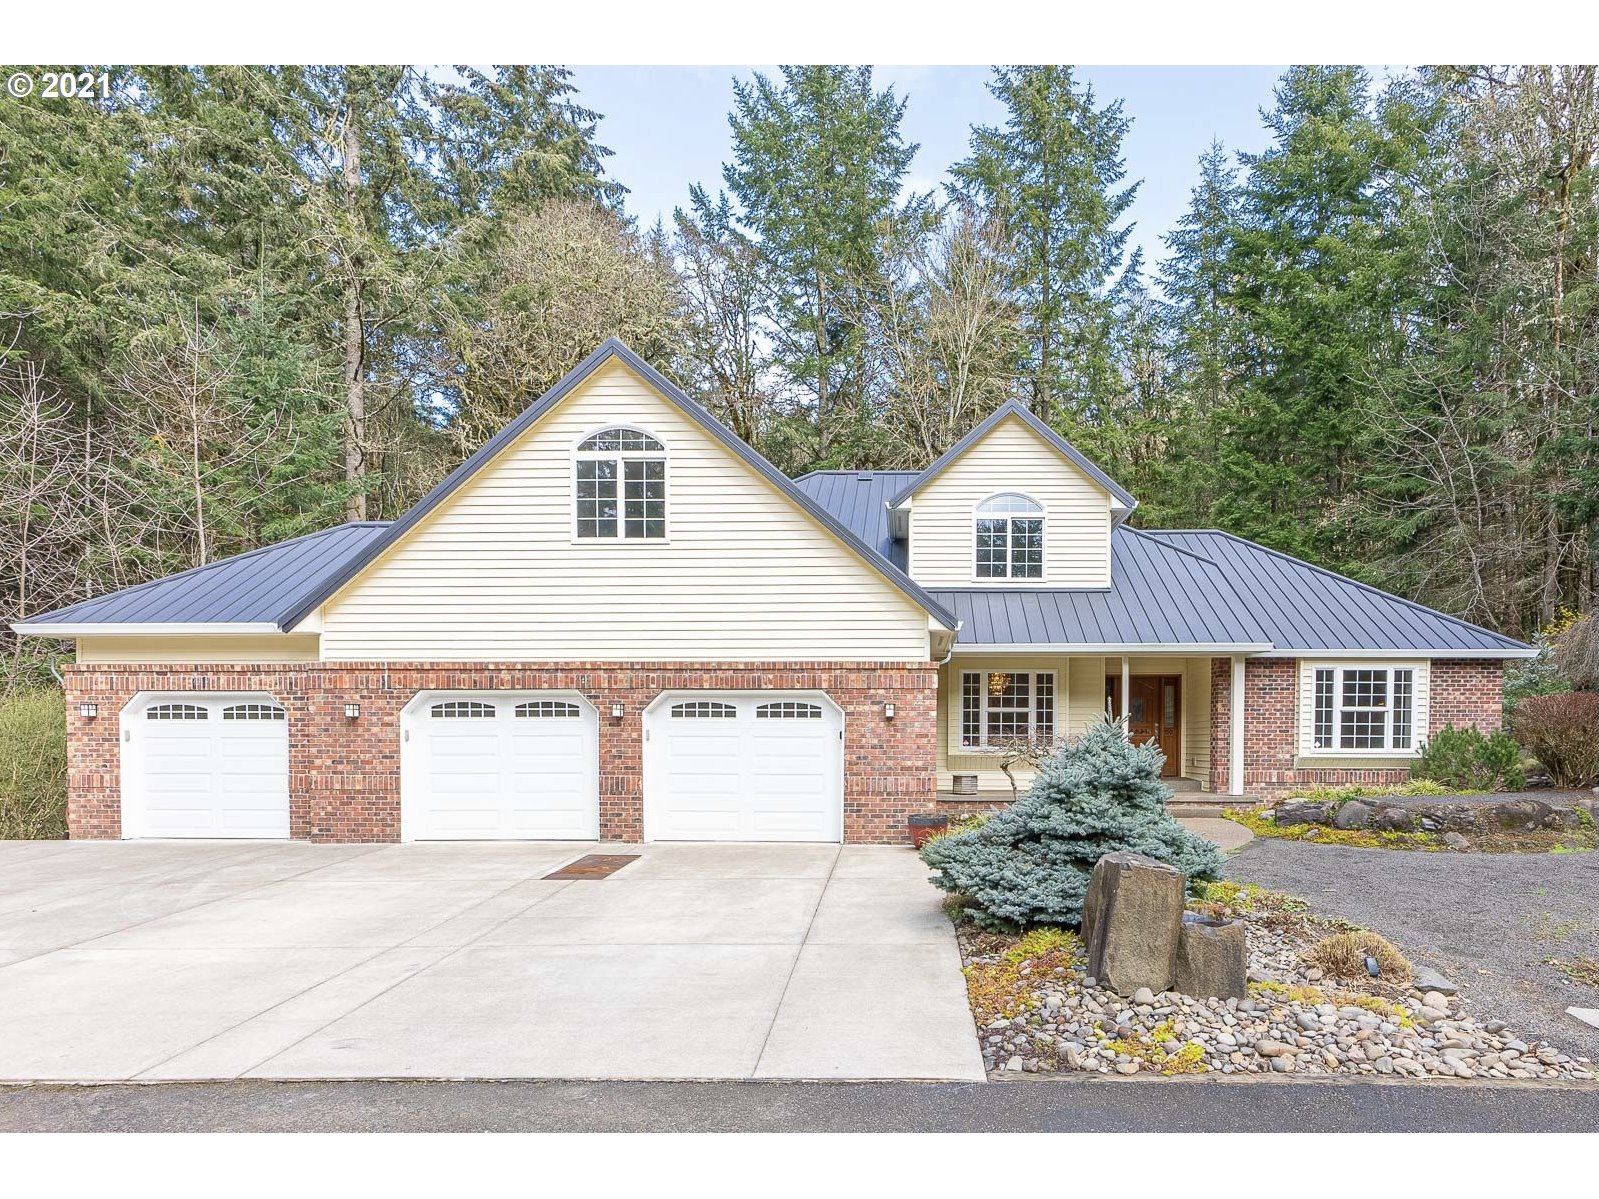 14830 NW BAKER CREEK RD (1 of 32)